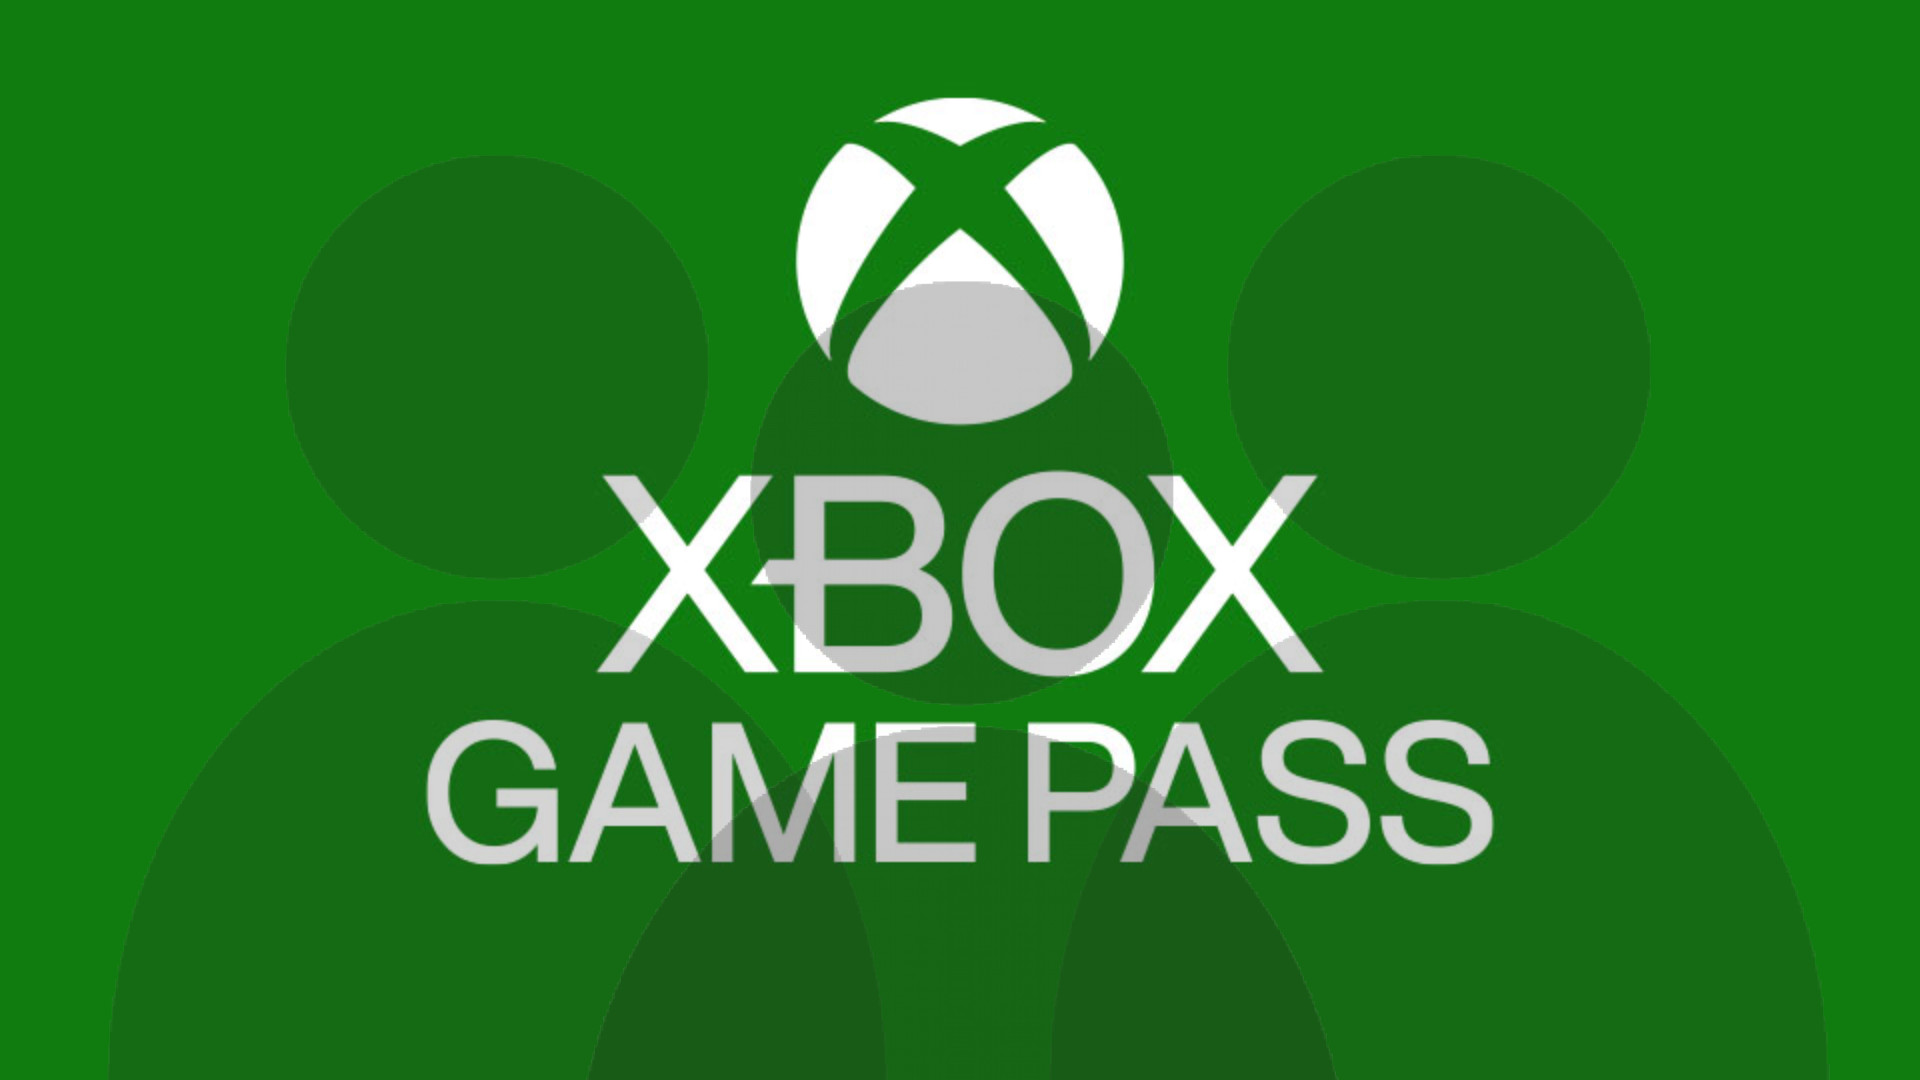 Xbox Game Pass family plan is official: here's how it works